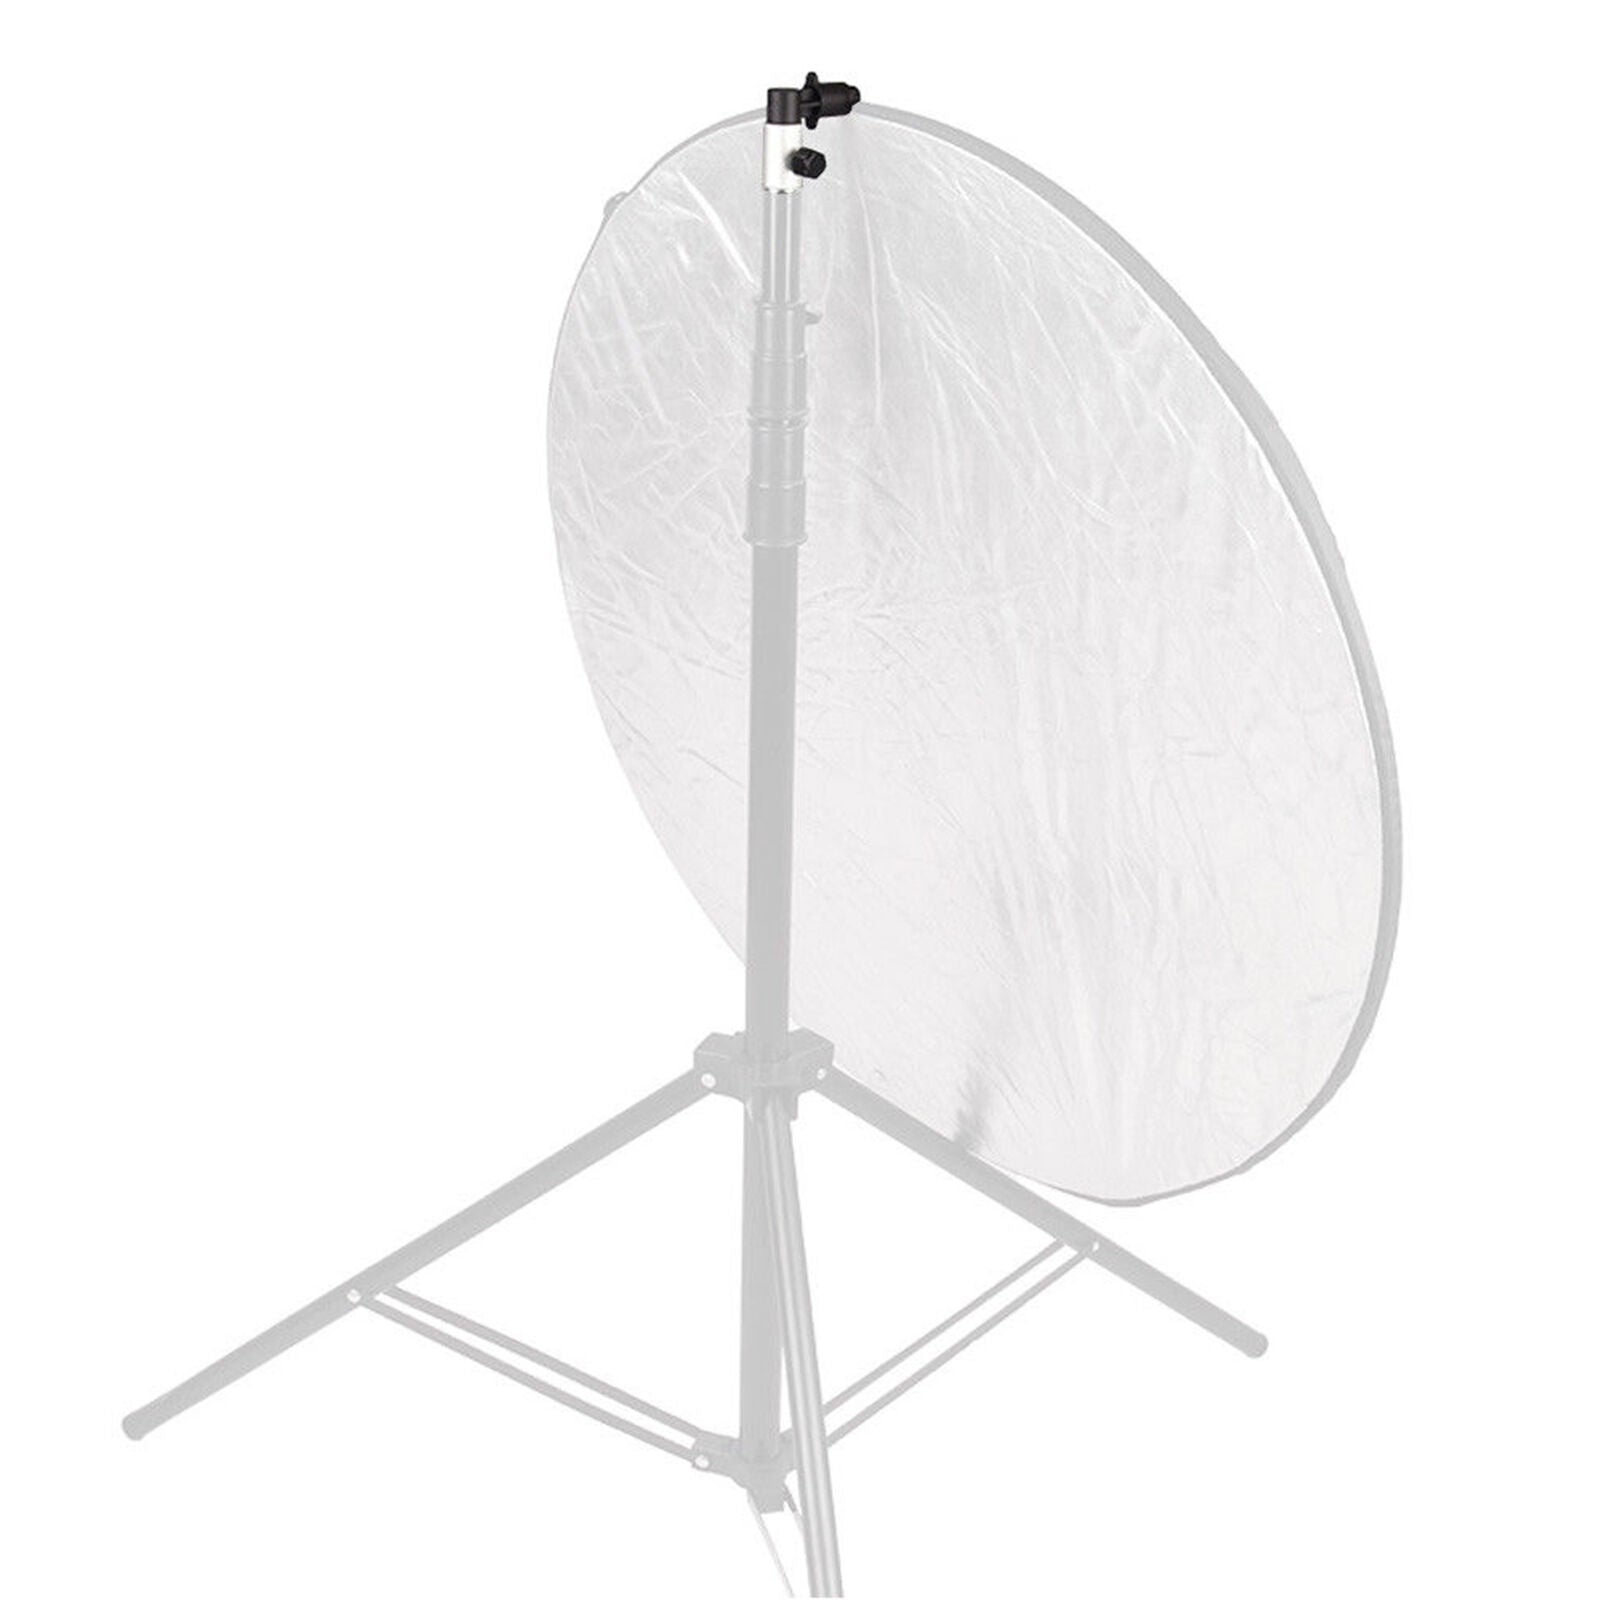 Photo Video Background Studio Reflector Disc Holder Clip Clamp For Light Stand